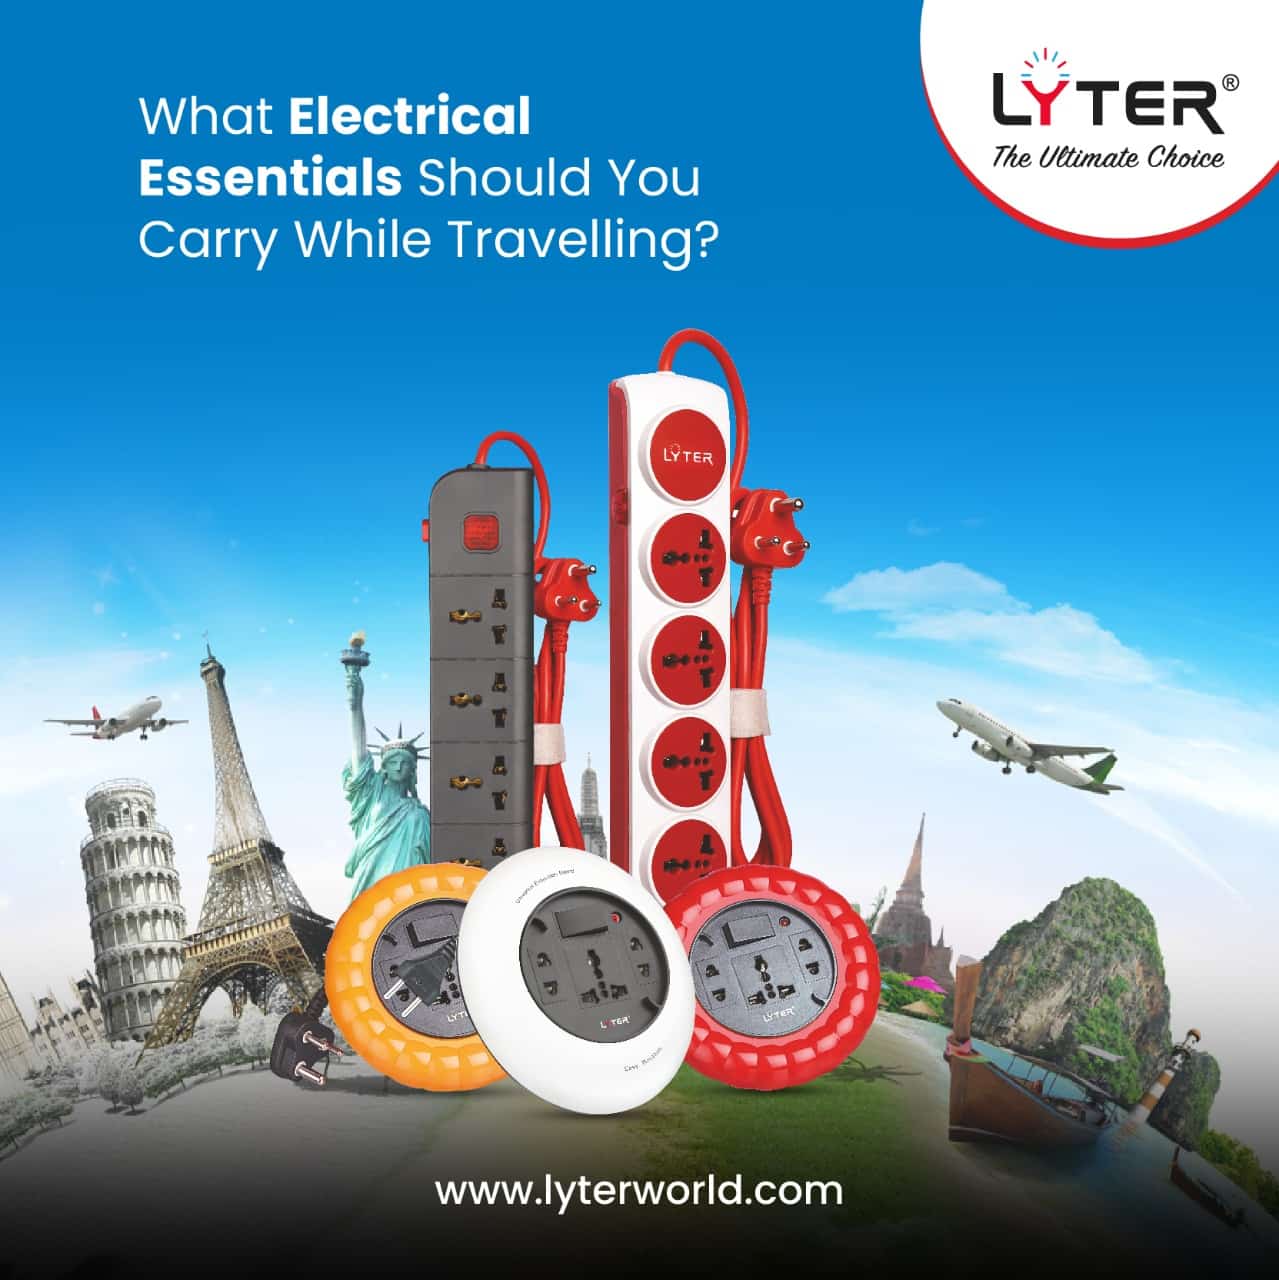 Electrical essentials for travelling